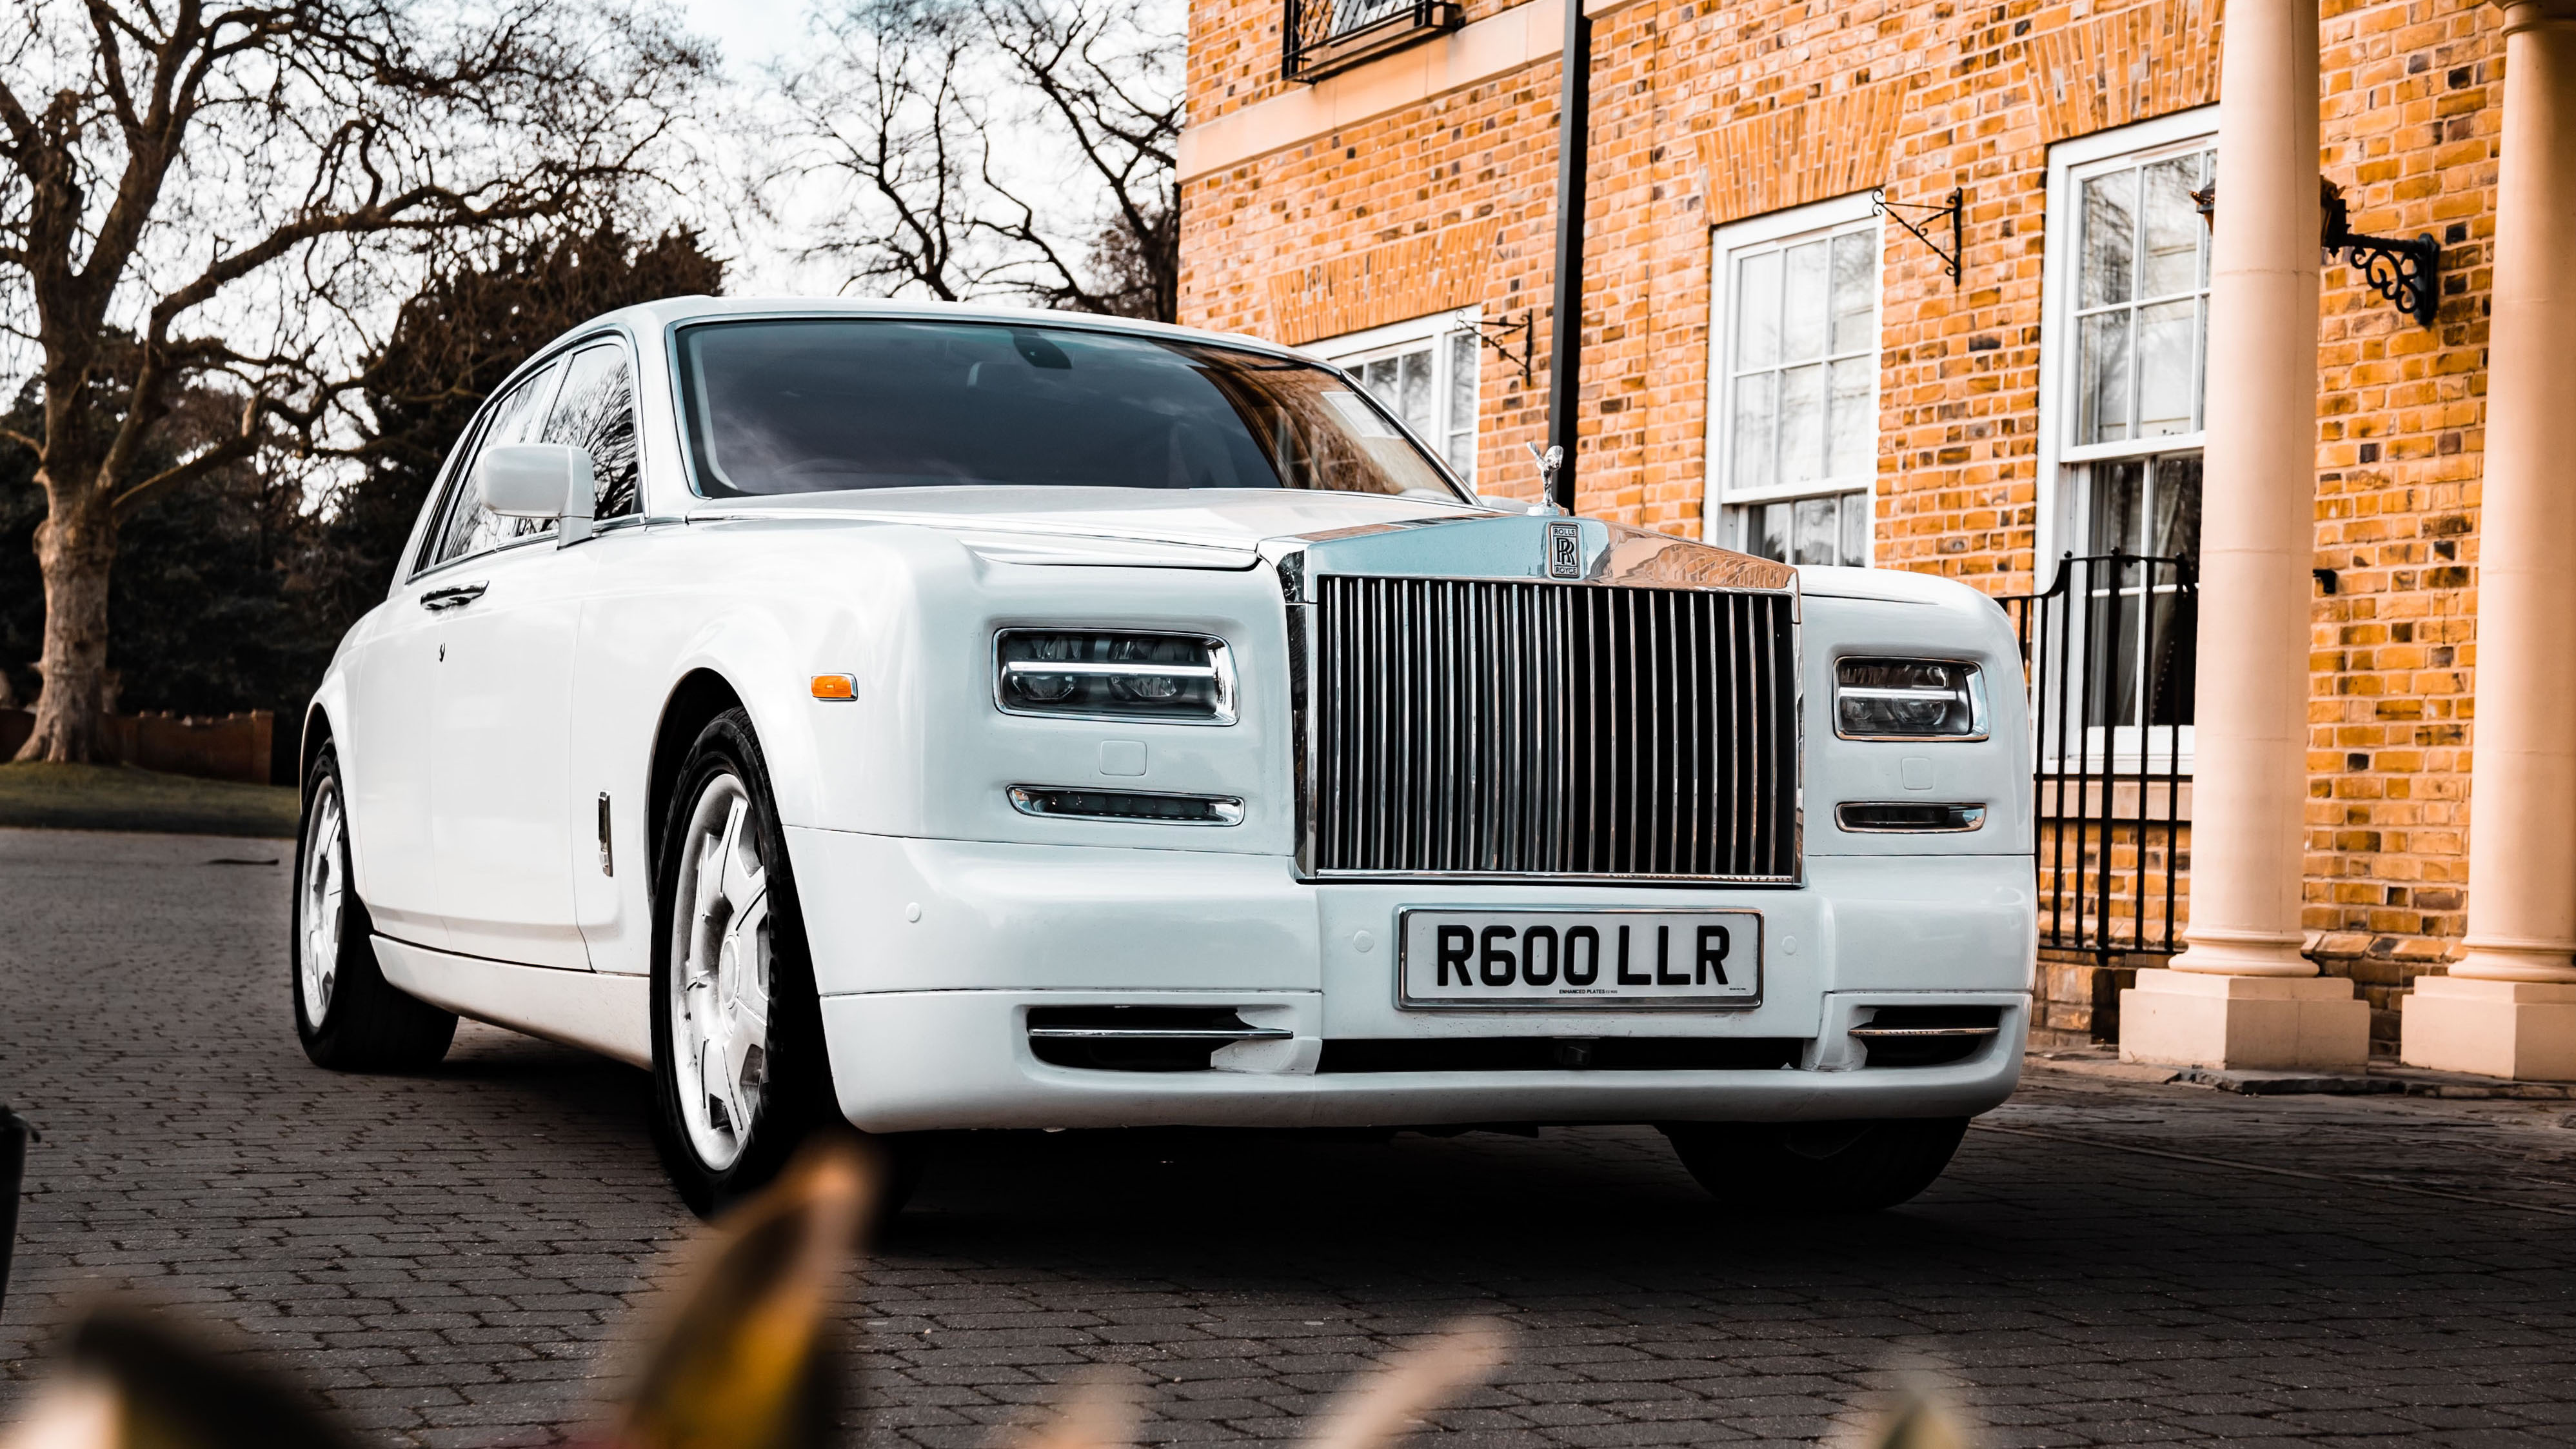 Modern white Rolls-Royce Phantom with its large chrome alloy wheels and iconic chrome front grill in attendance at a popular wedding venue in Chelmsford in Essex.